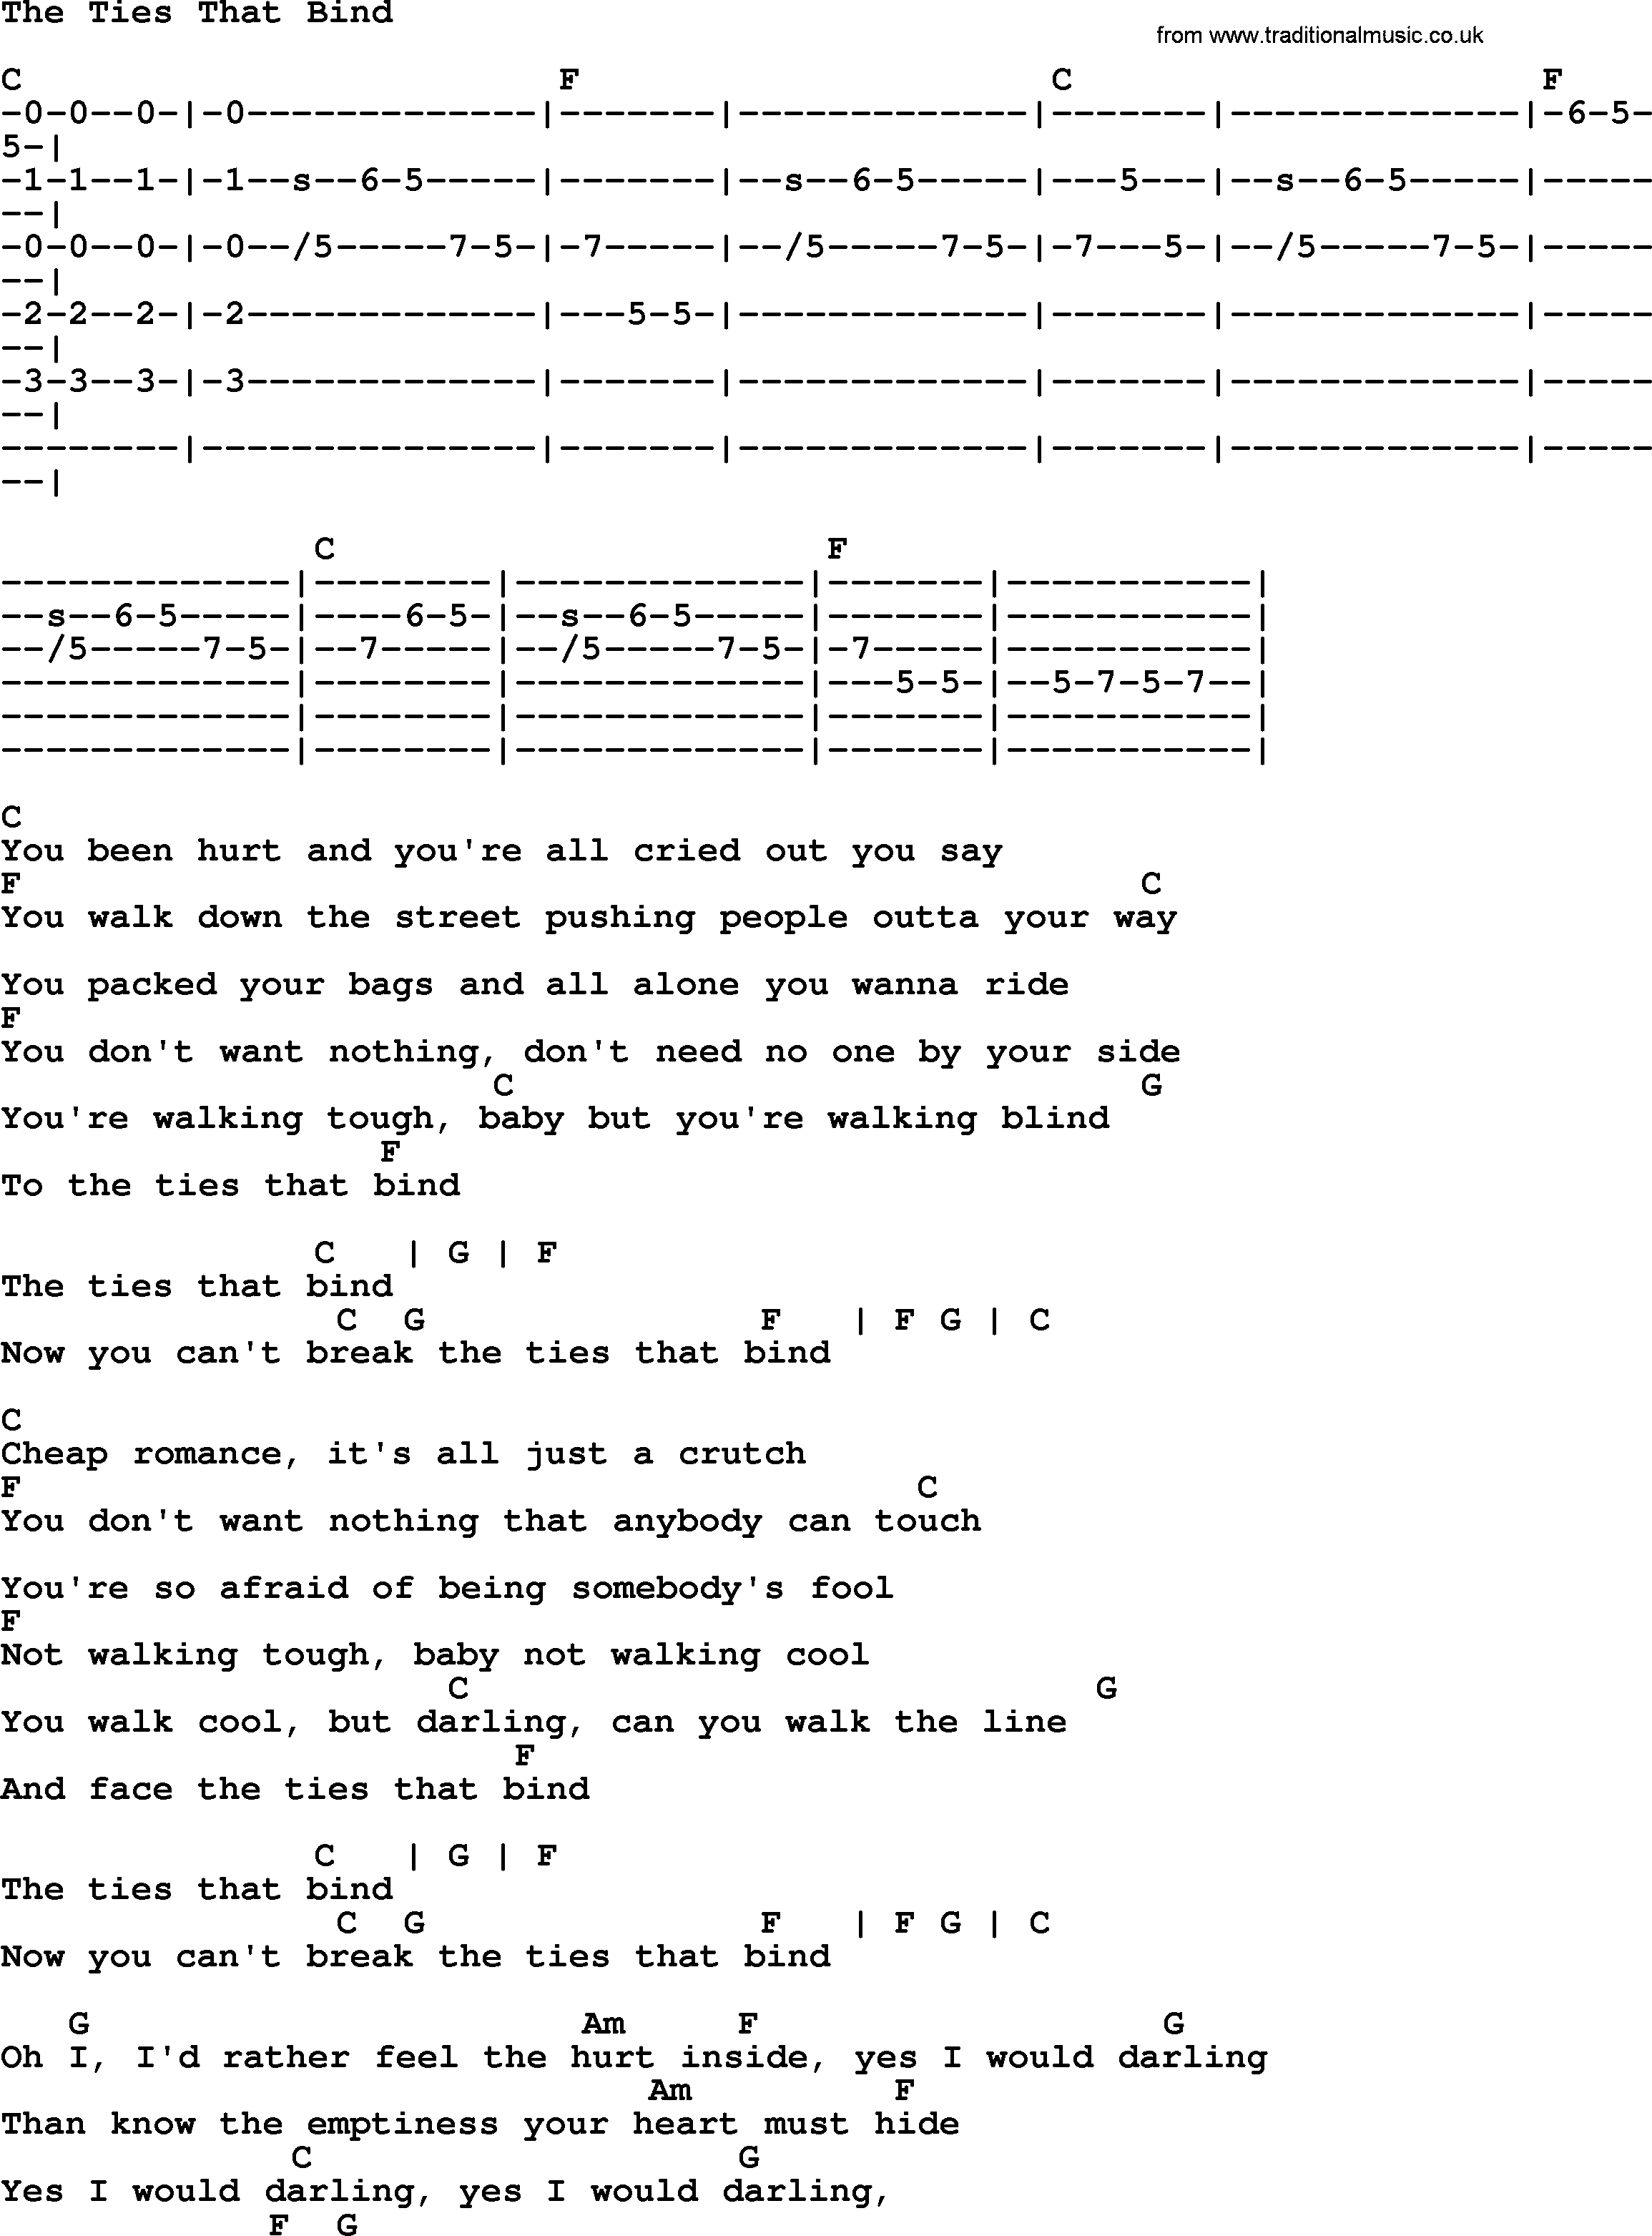 Bruce Springsteen song: The Ties That Bind, lyrics and chords